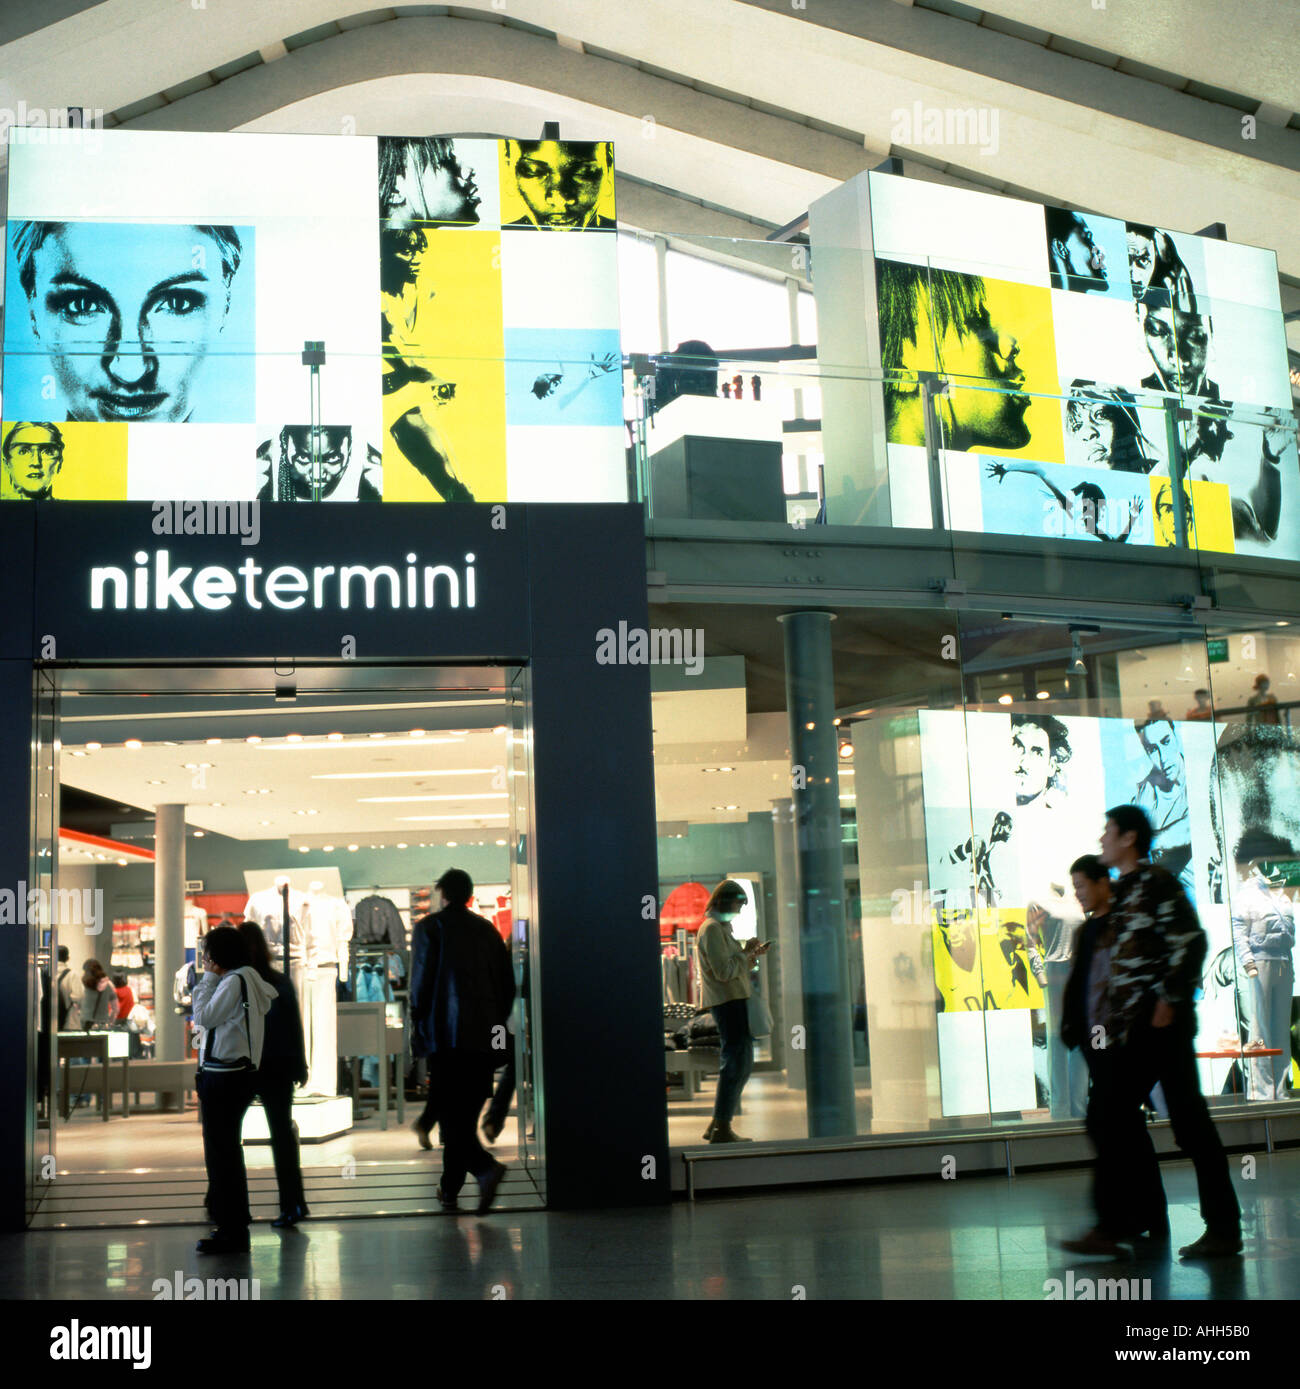 Nike termini train station rome High Resolution Stock Photography and  Images - Alamy